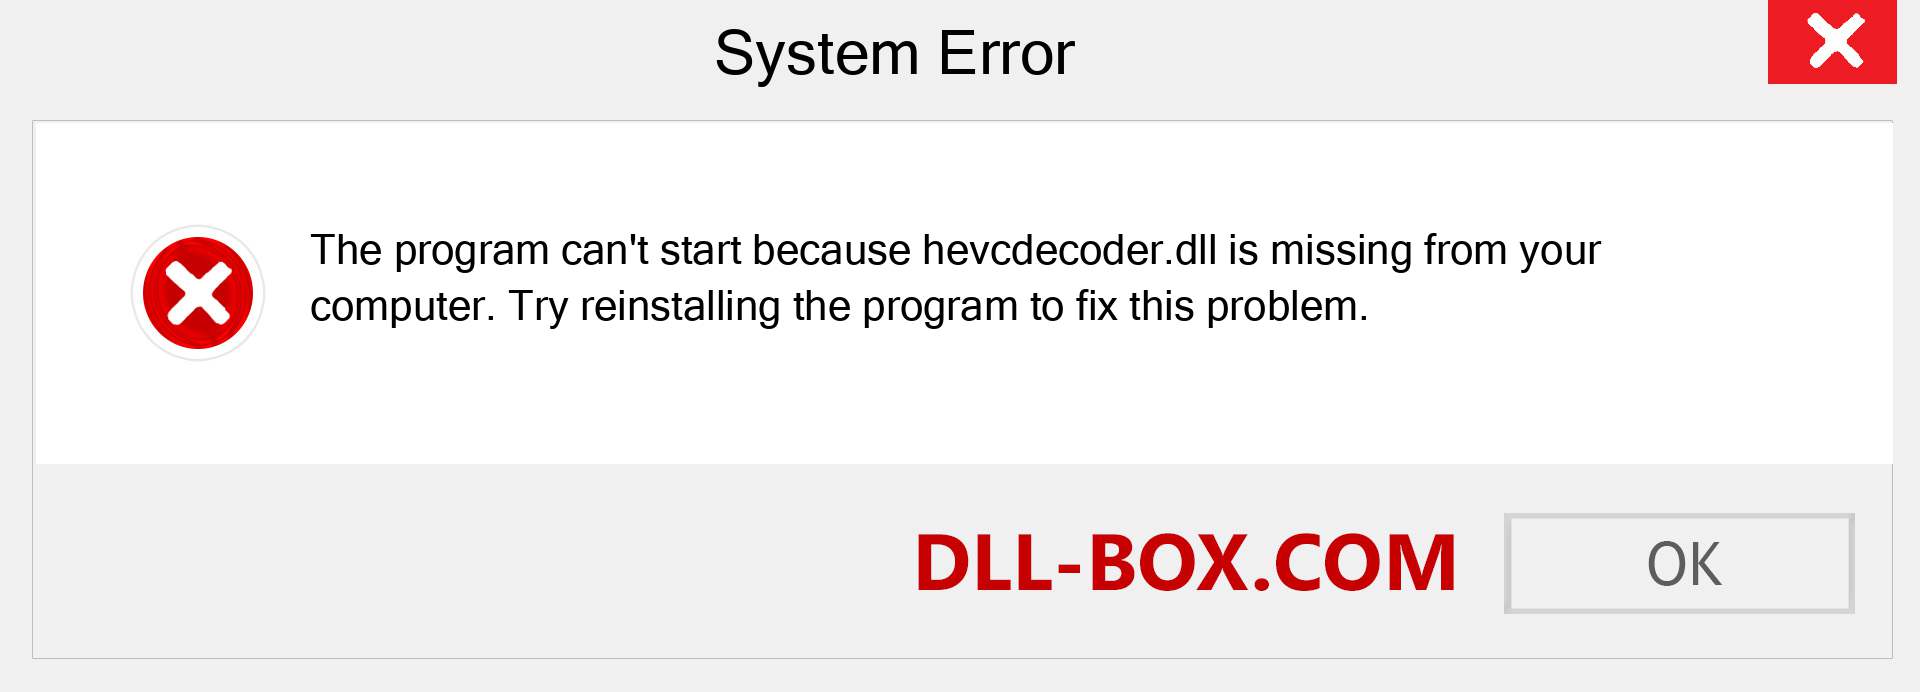  hevcdecoder.dll file is missing?. Download for Windows 7, 8, 10 - Fix  hevcdecoder dll Missing Error on Windows, photos, images